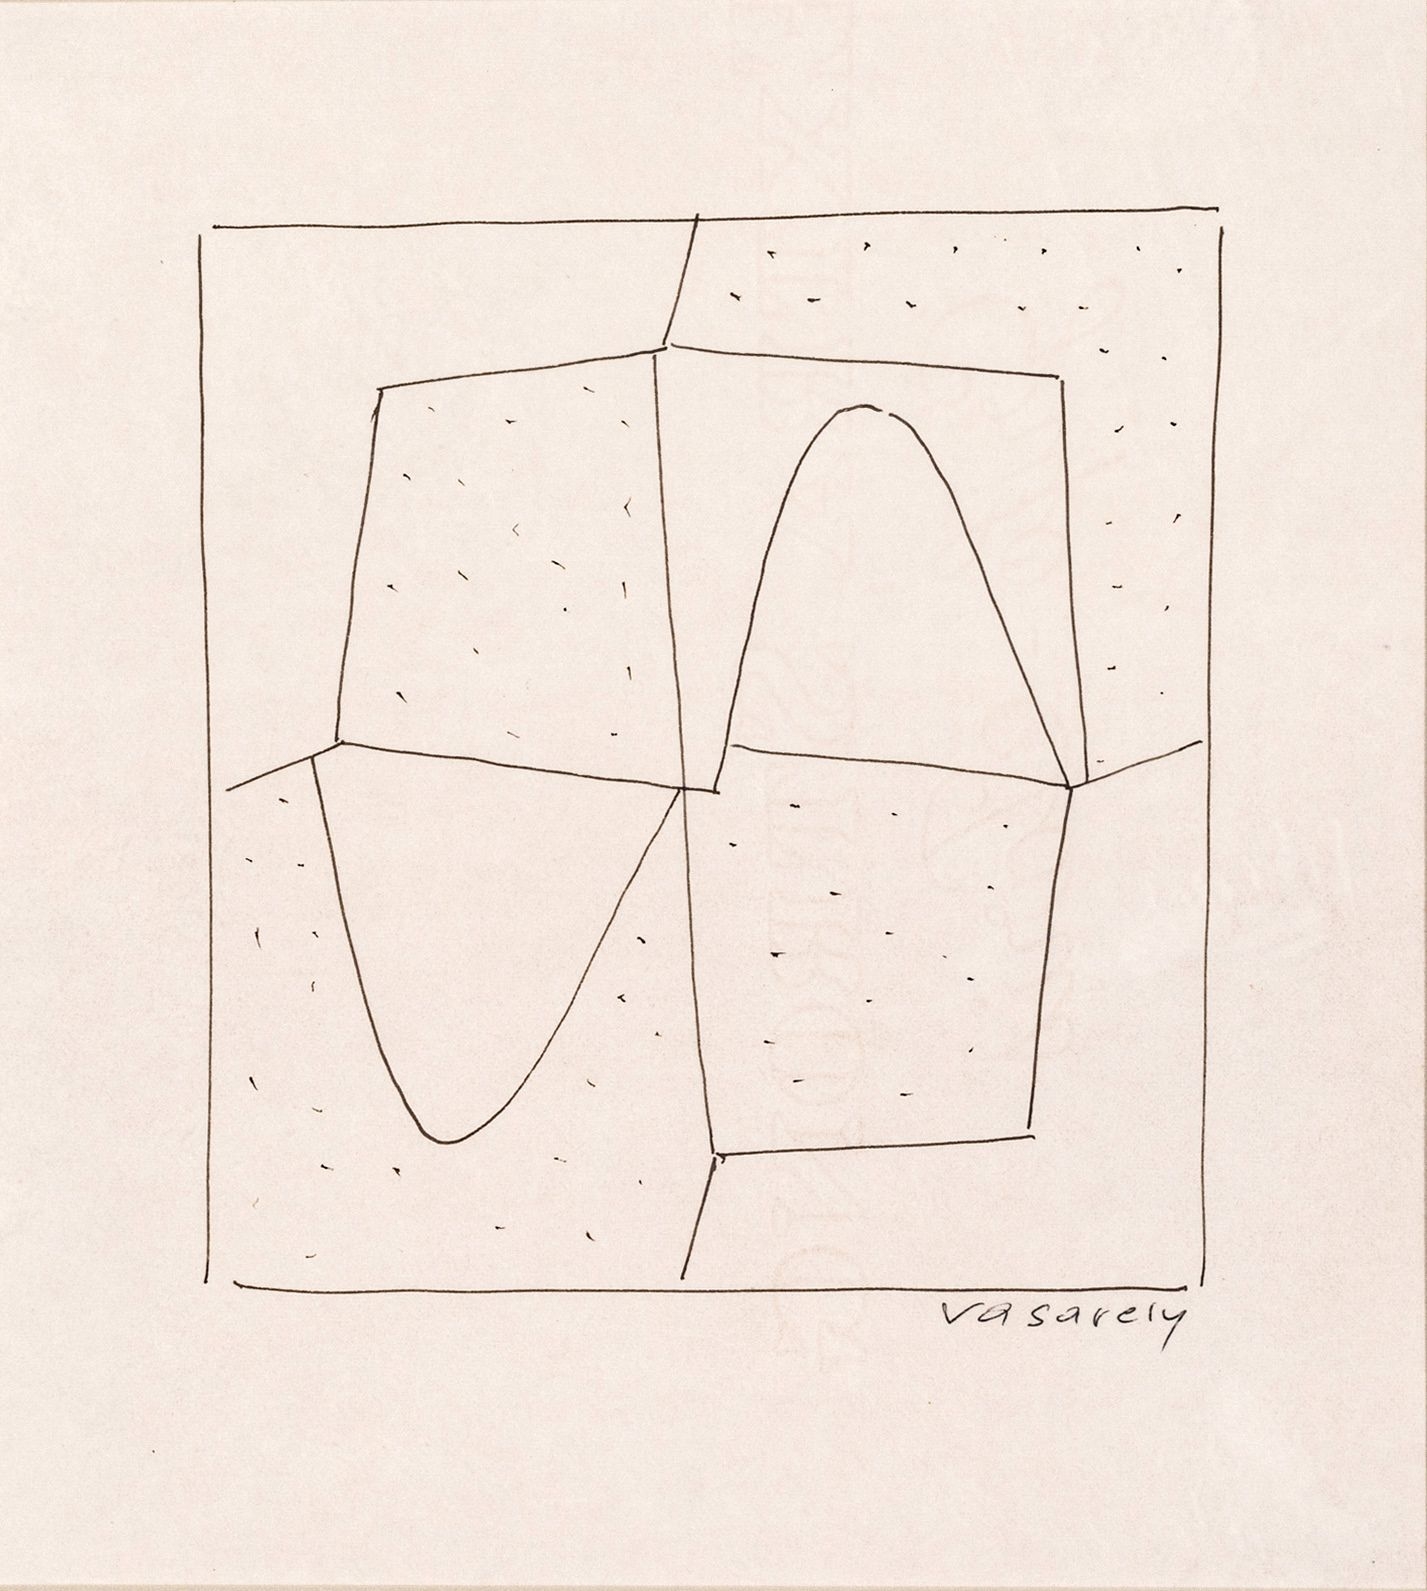 Victor Vasarely (French/Hungarian, 1906-1997) Ink on Watermarked Paper, "Untitled", H 8.5" W 7.5 - Victor Vasarely